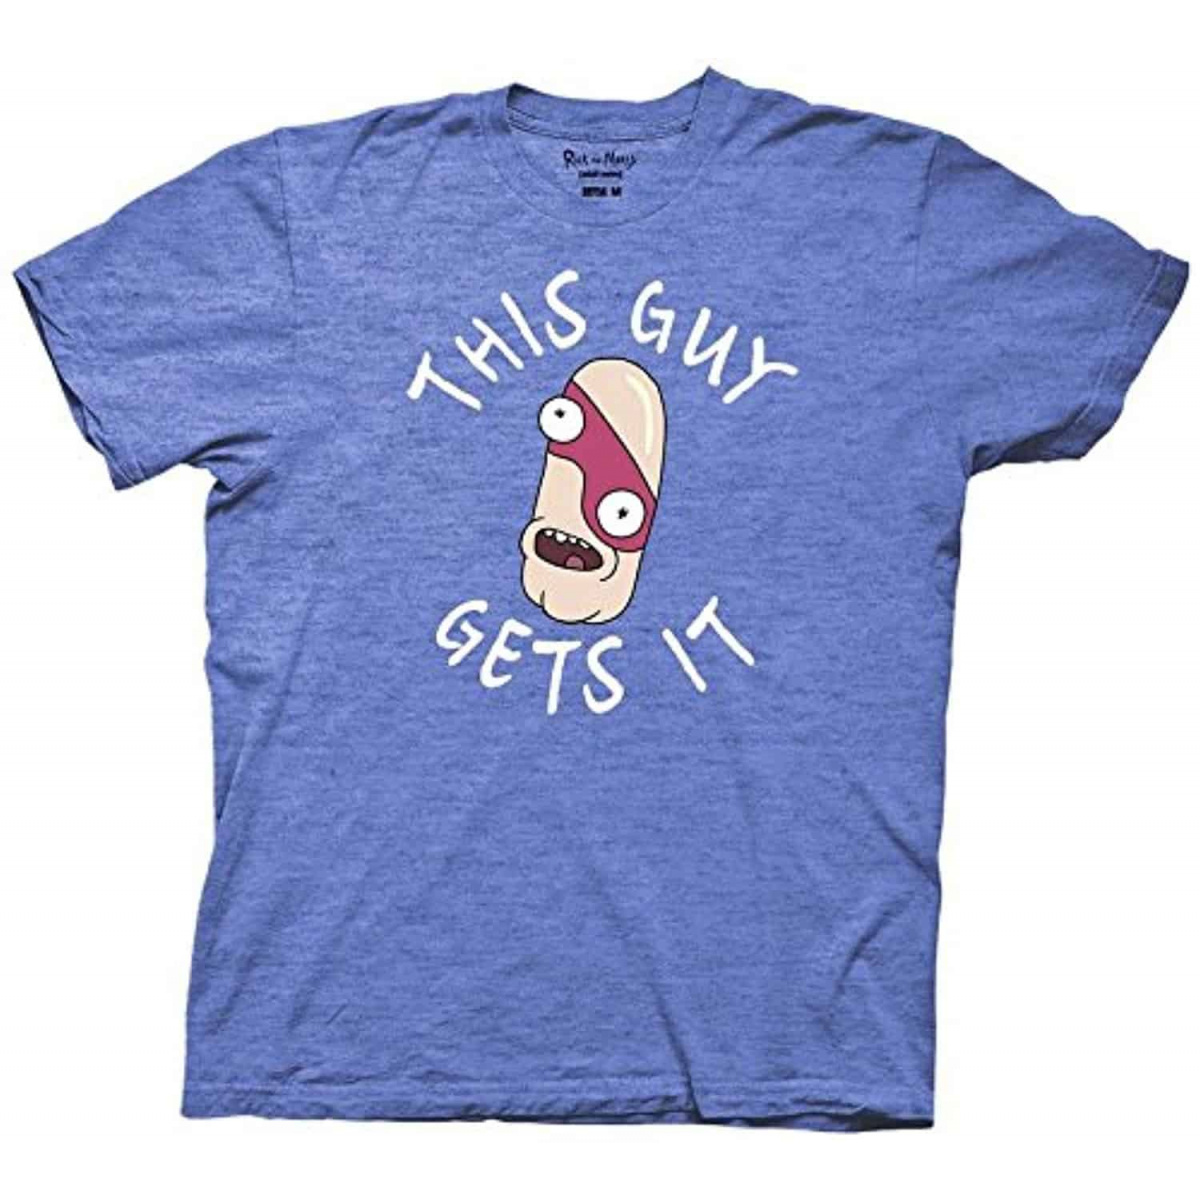 Rick and Morty This Guy Gets It Crew T-Shirt